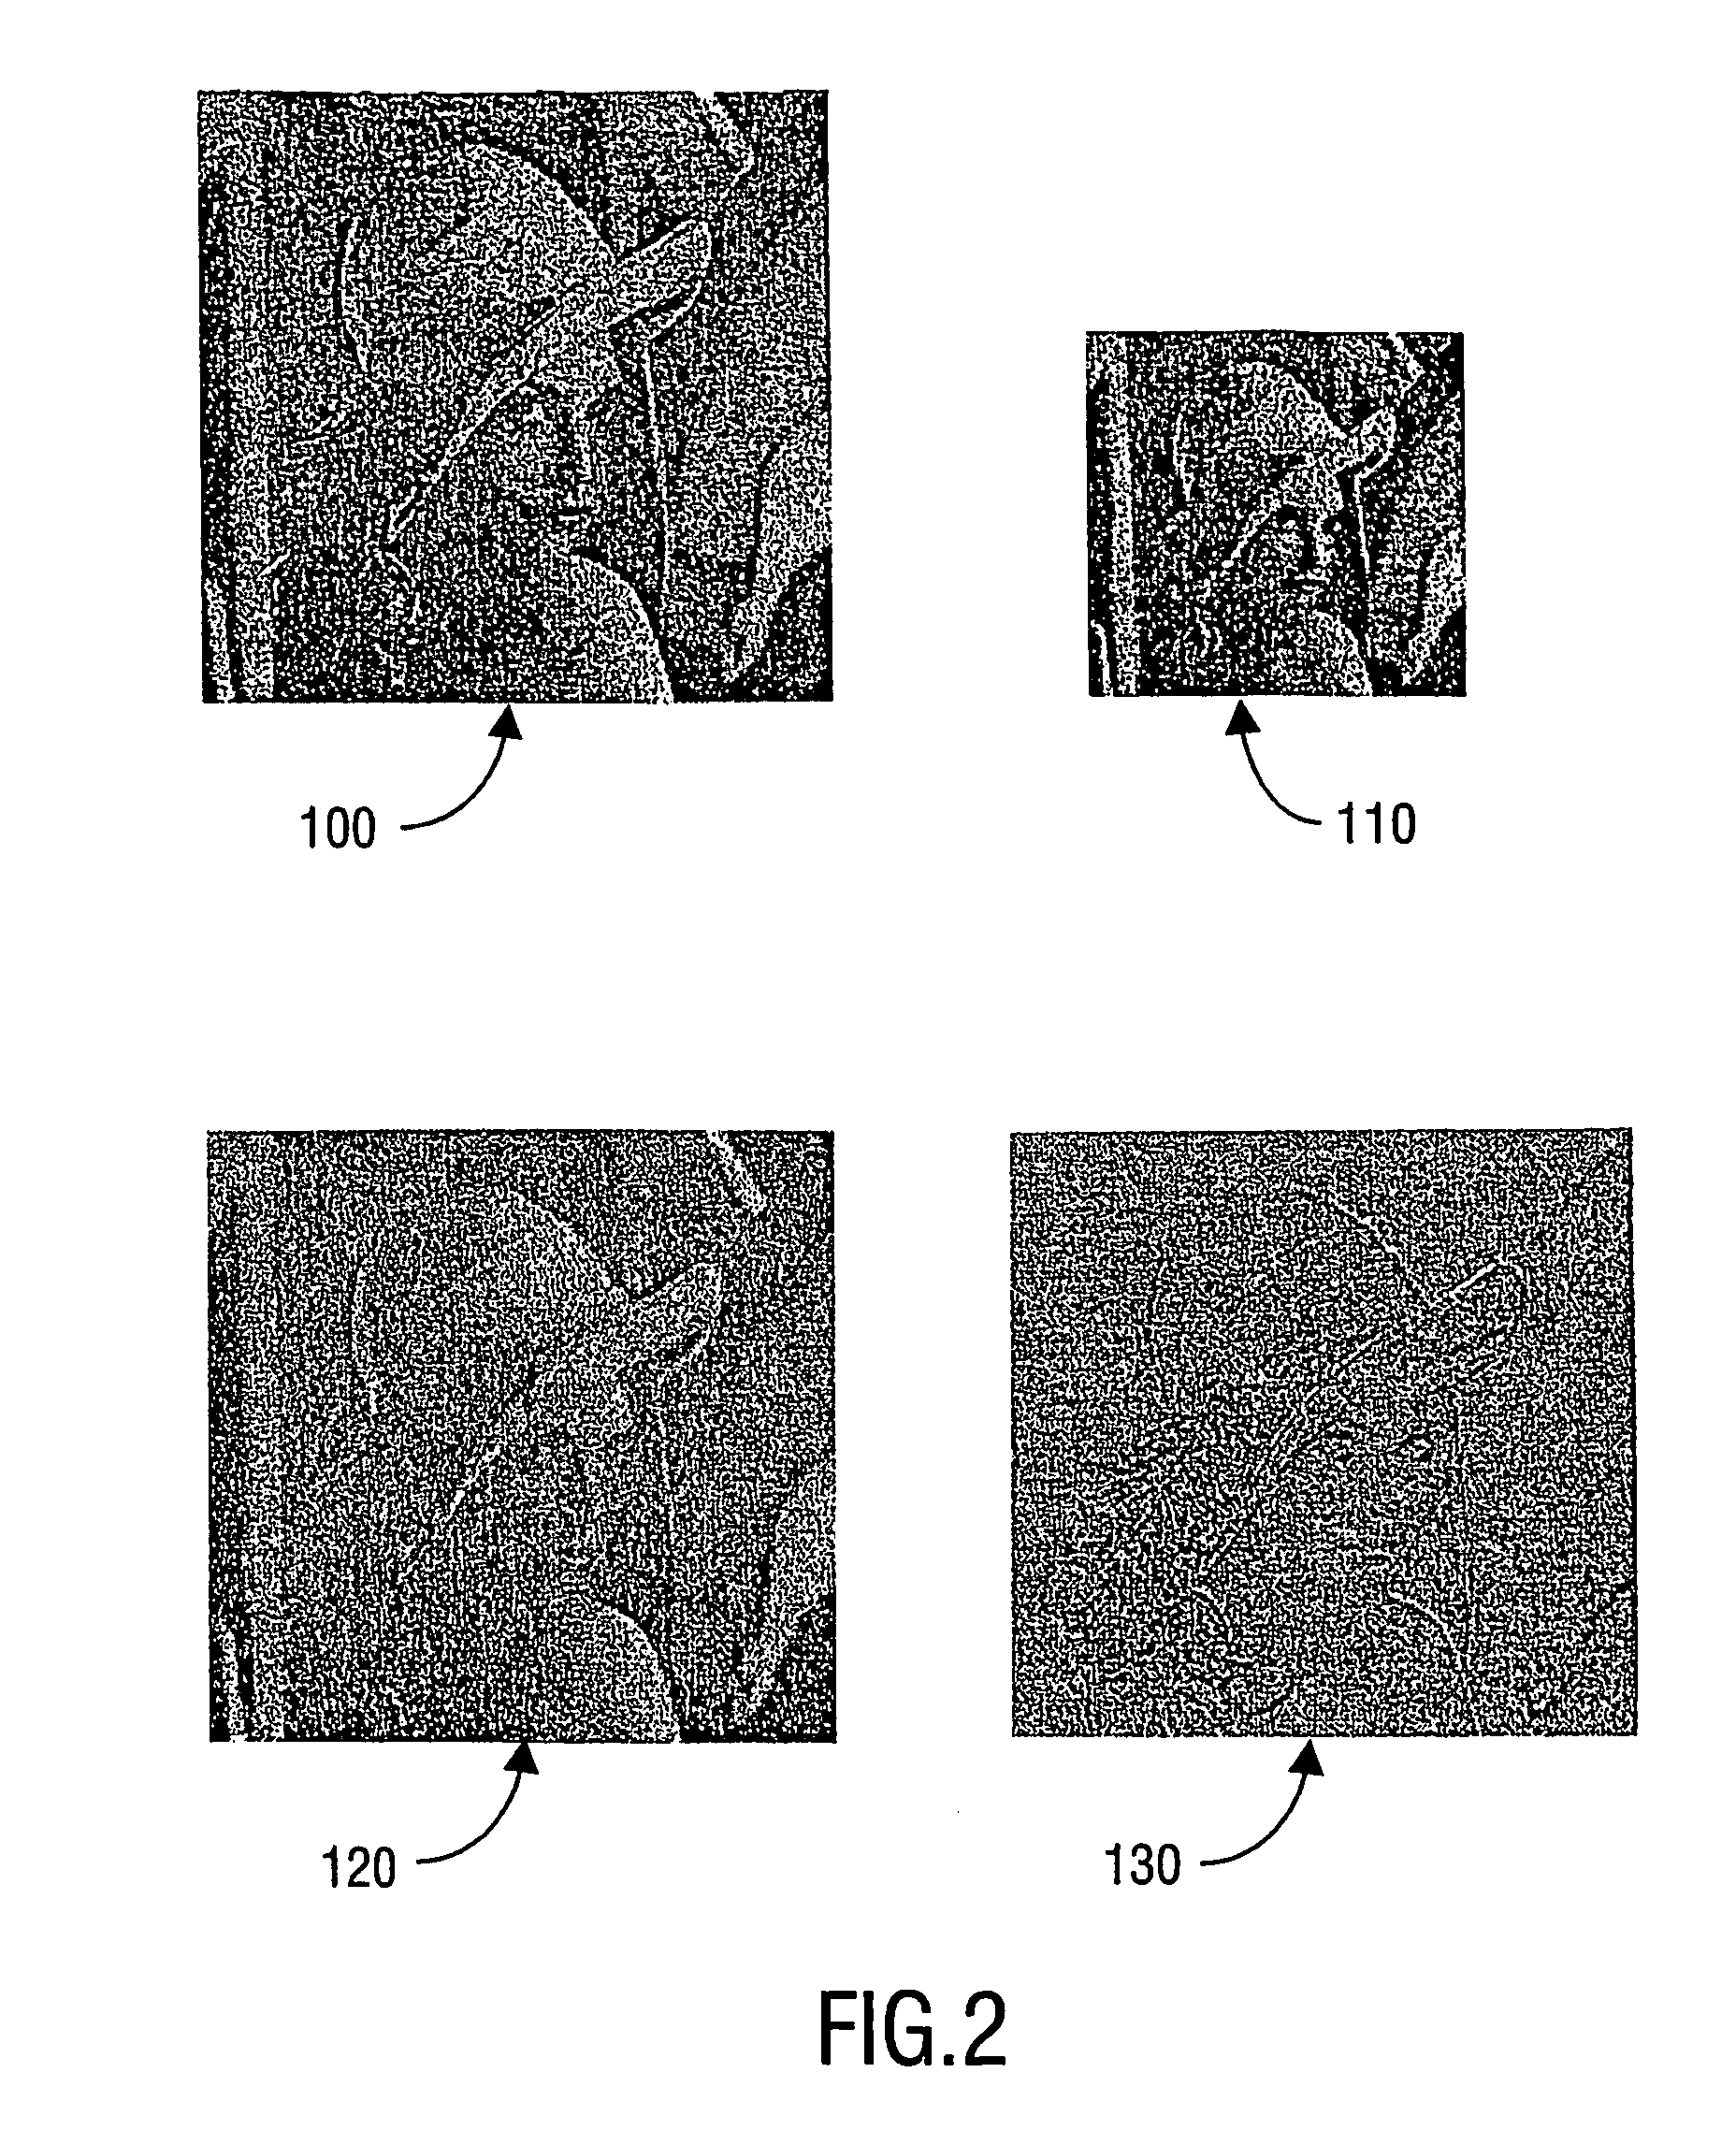 System and method for encoding and decoding enhancement layer data using descriptive model parameters